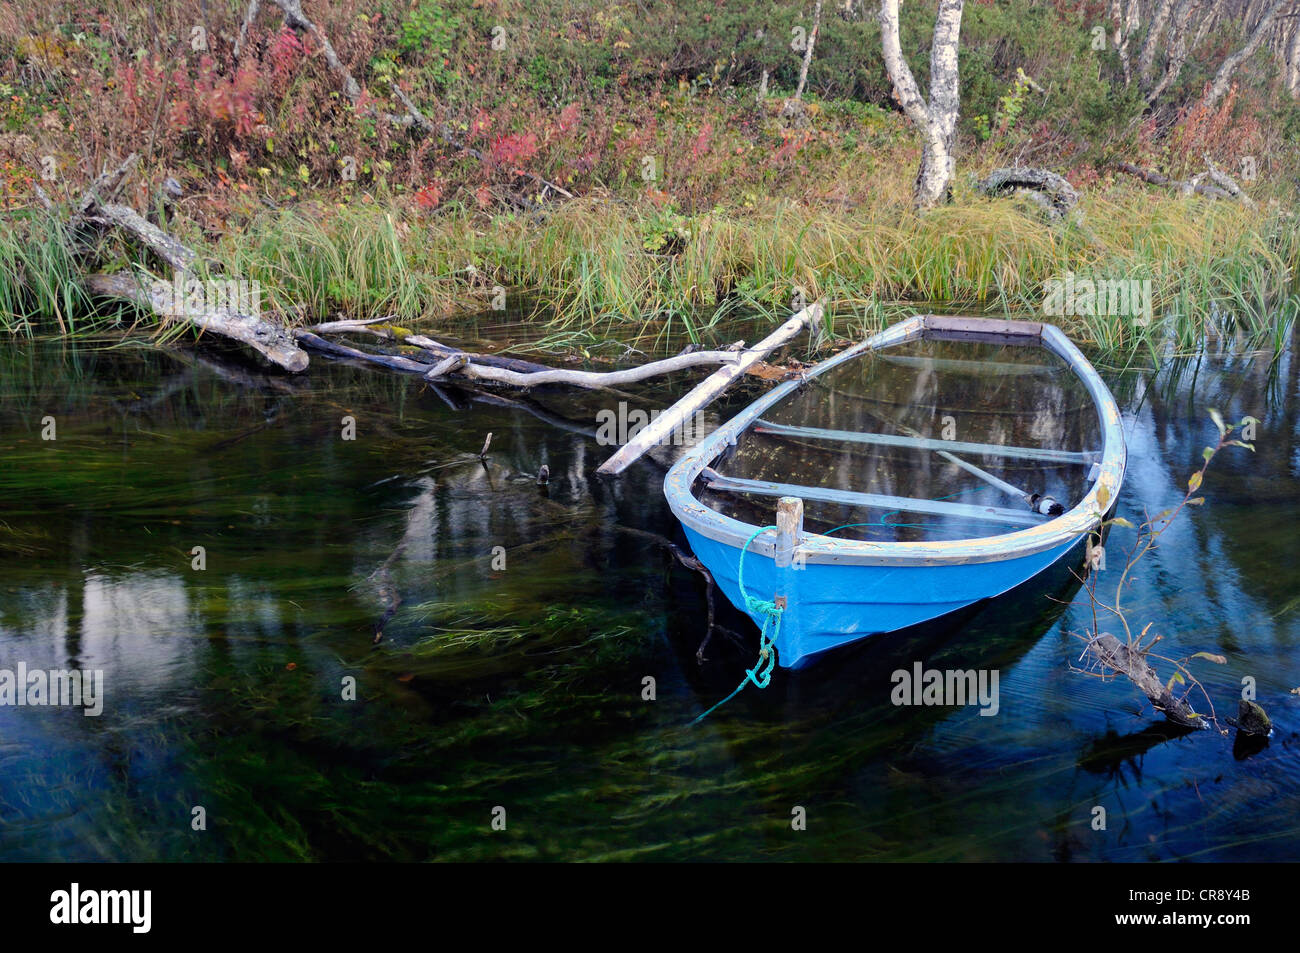 Old sunken boat in a creek, Rondane National Park, Norway, Europe Stock Photo